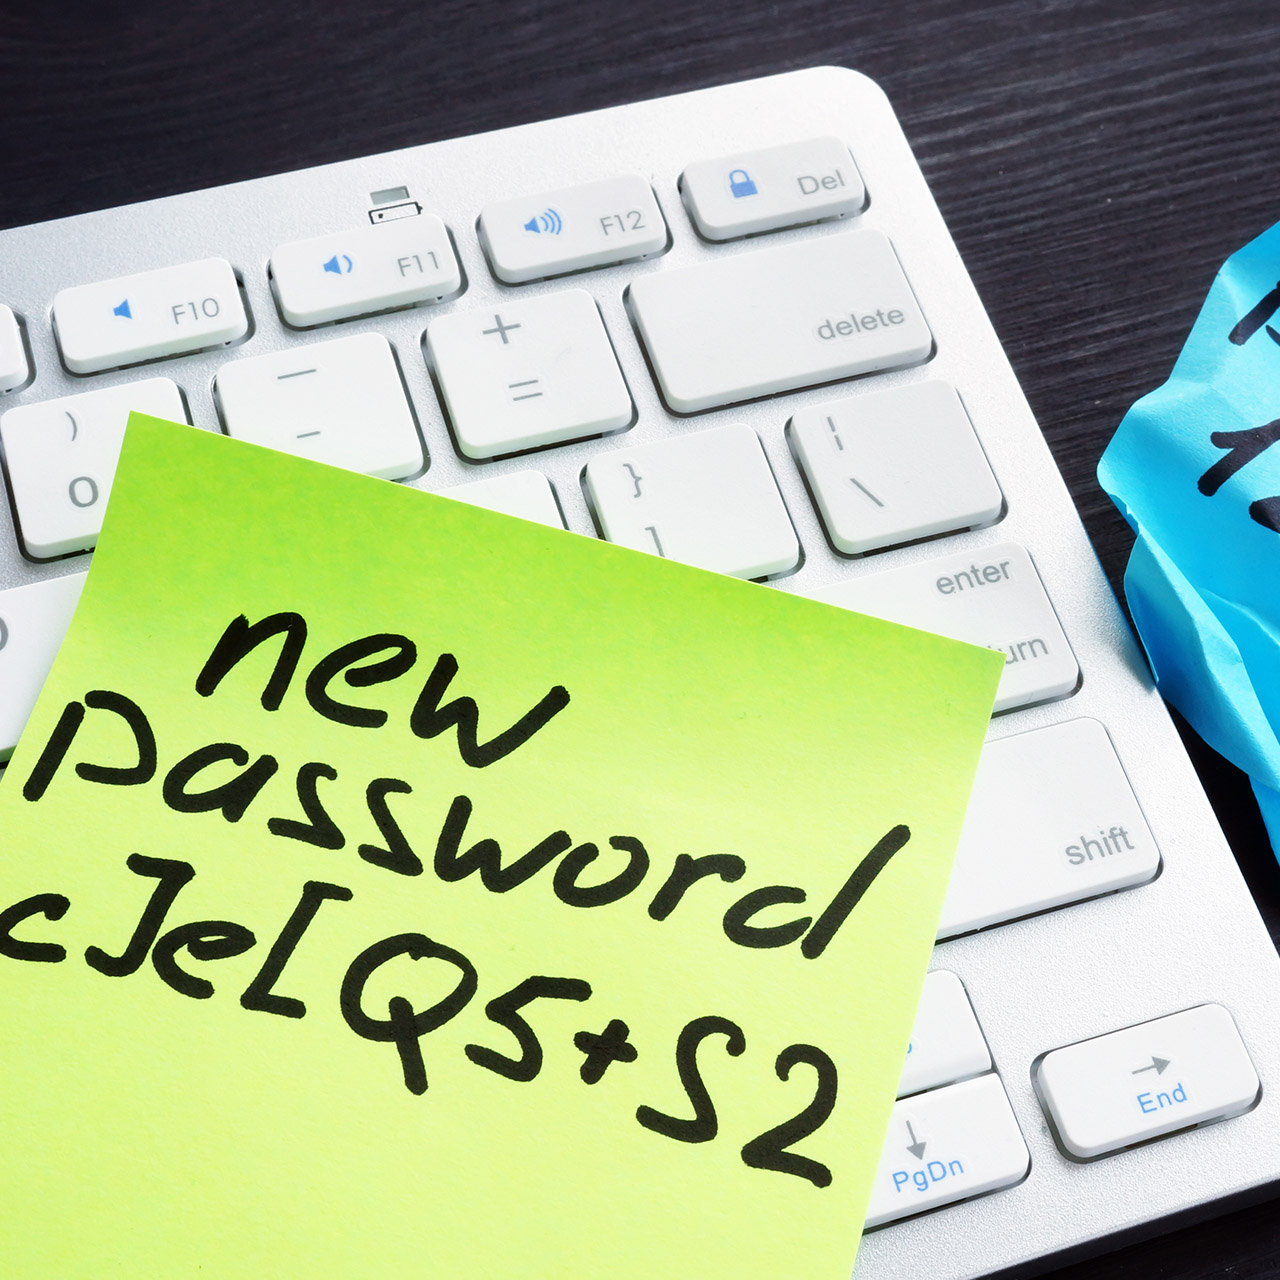 How to protect clear-text passwords